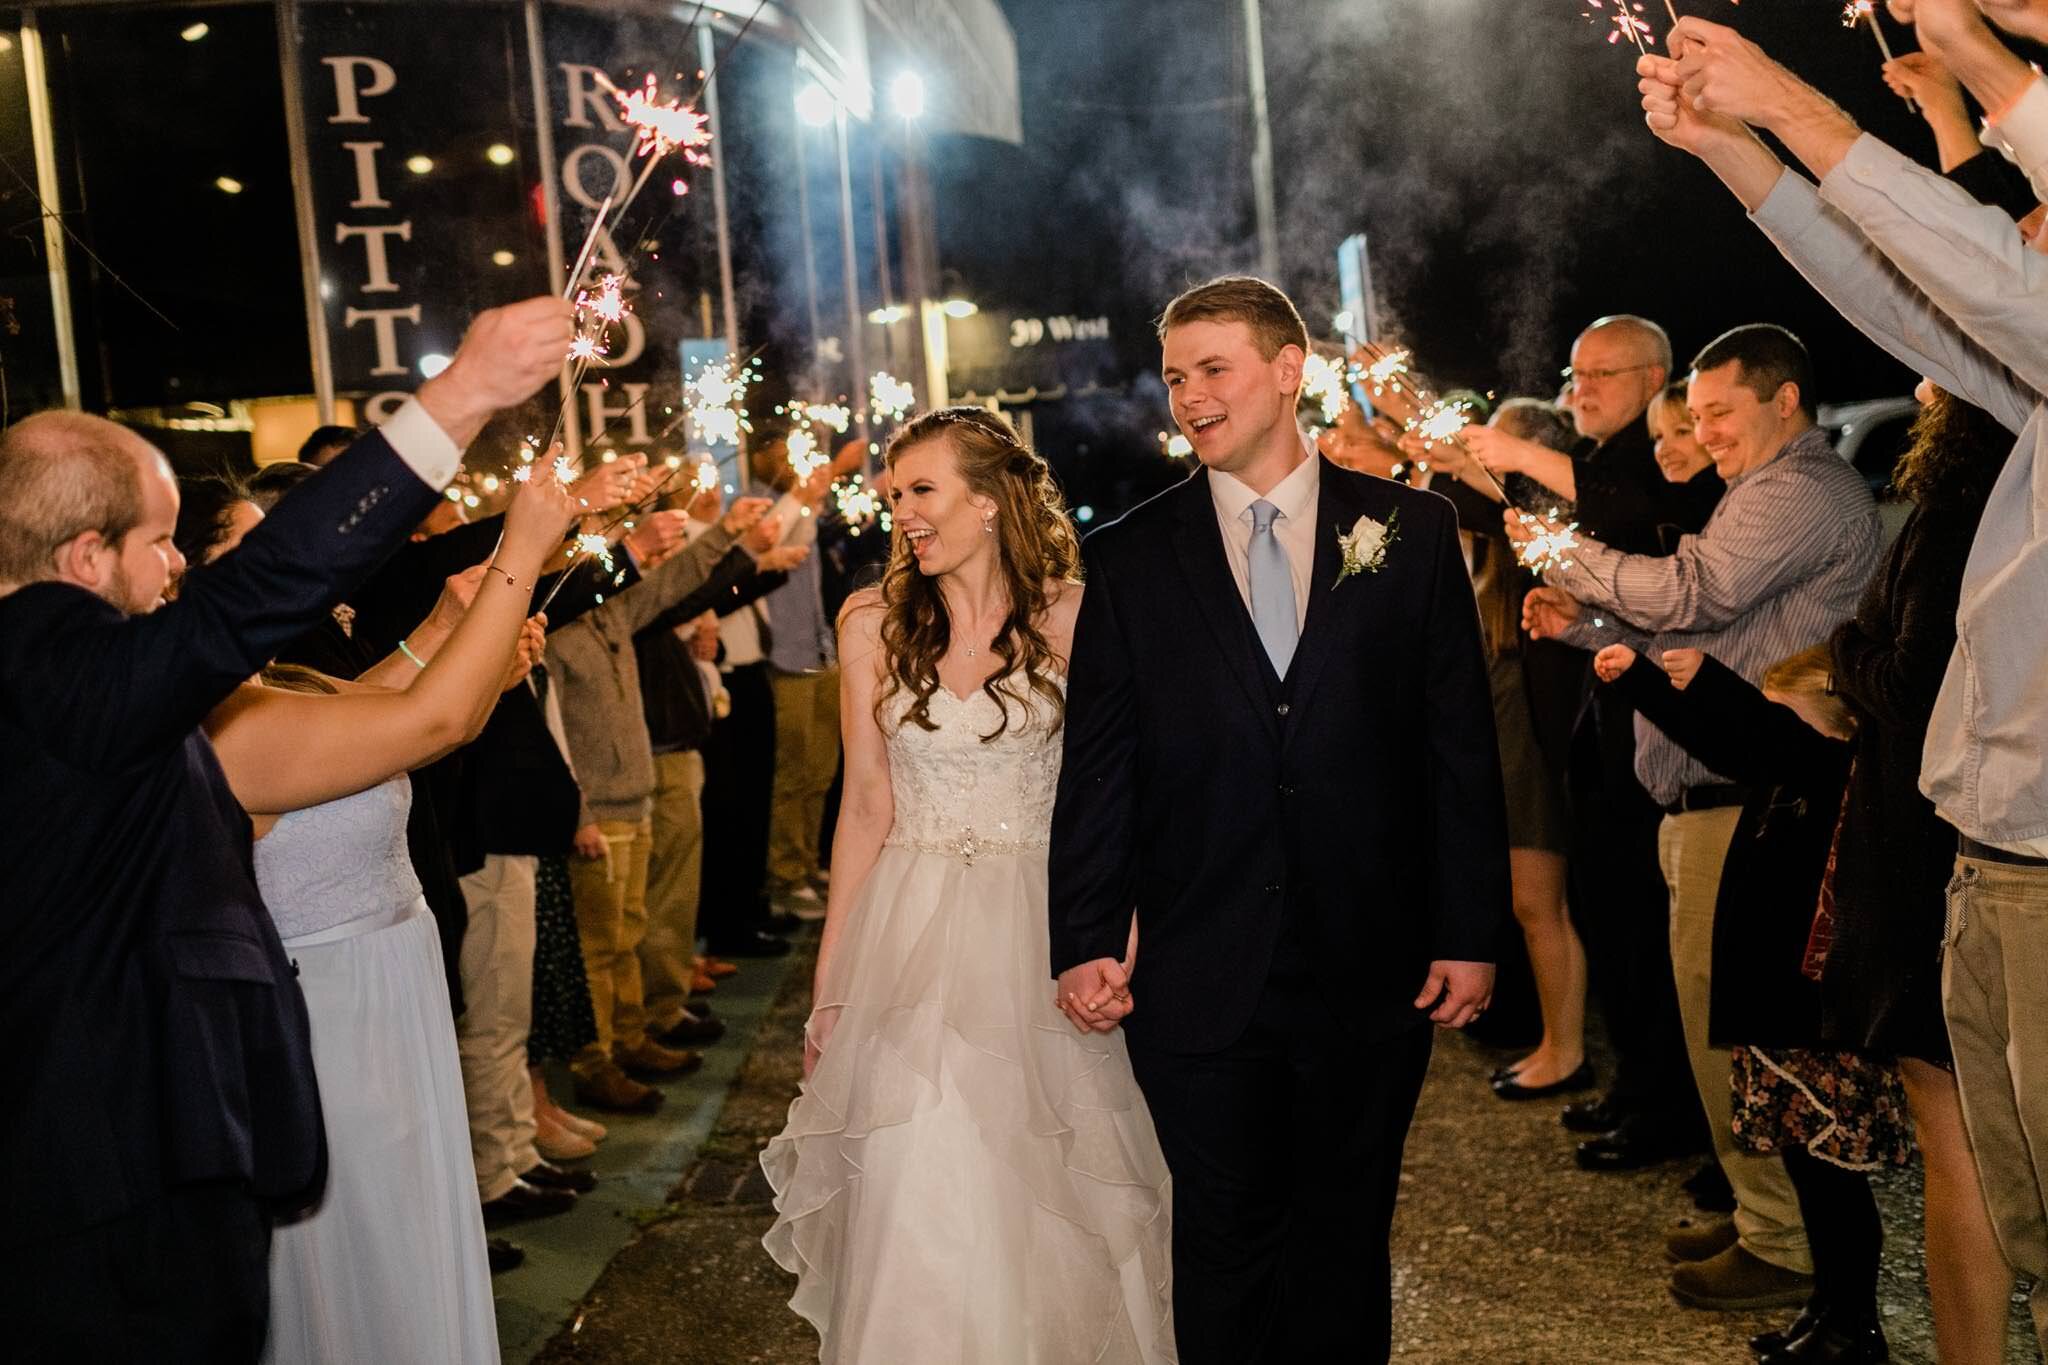 Durham Wedding Photographer | By G. Lin Photography | Bride and groom looking at guests and laughing during sparkler sendoff